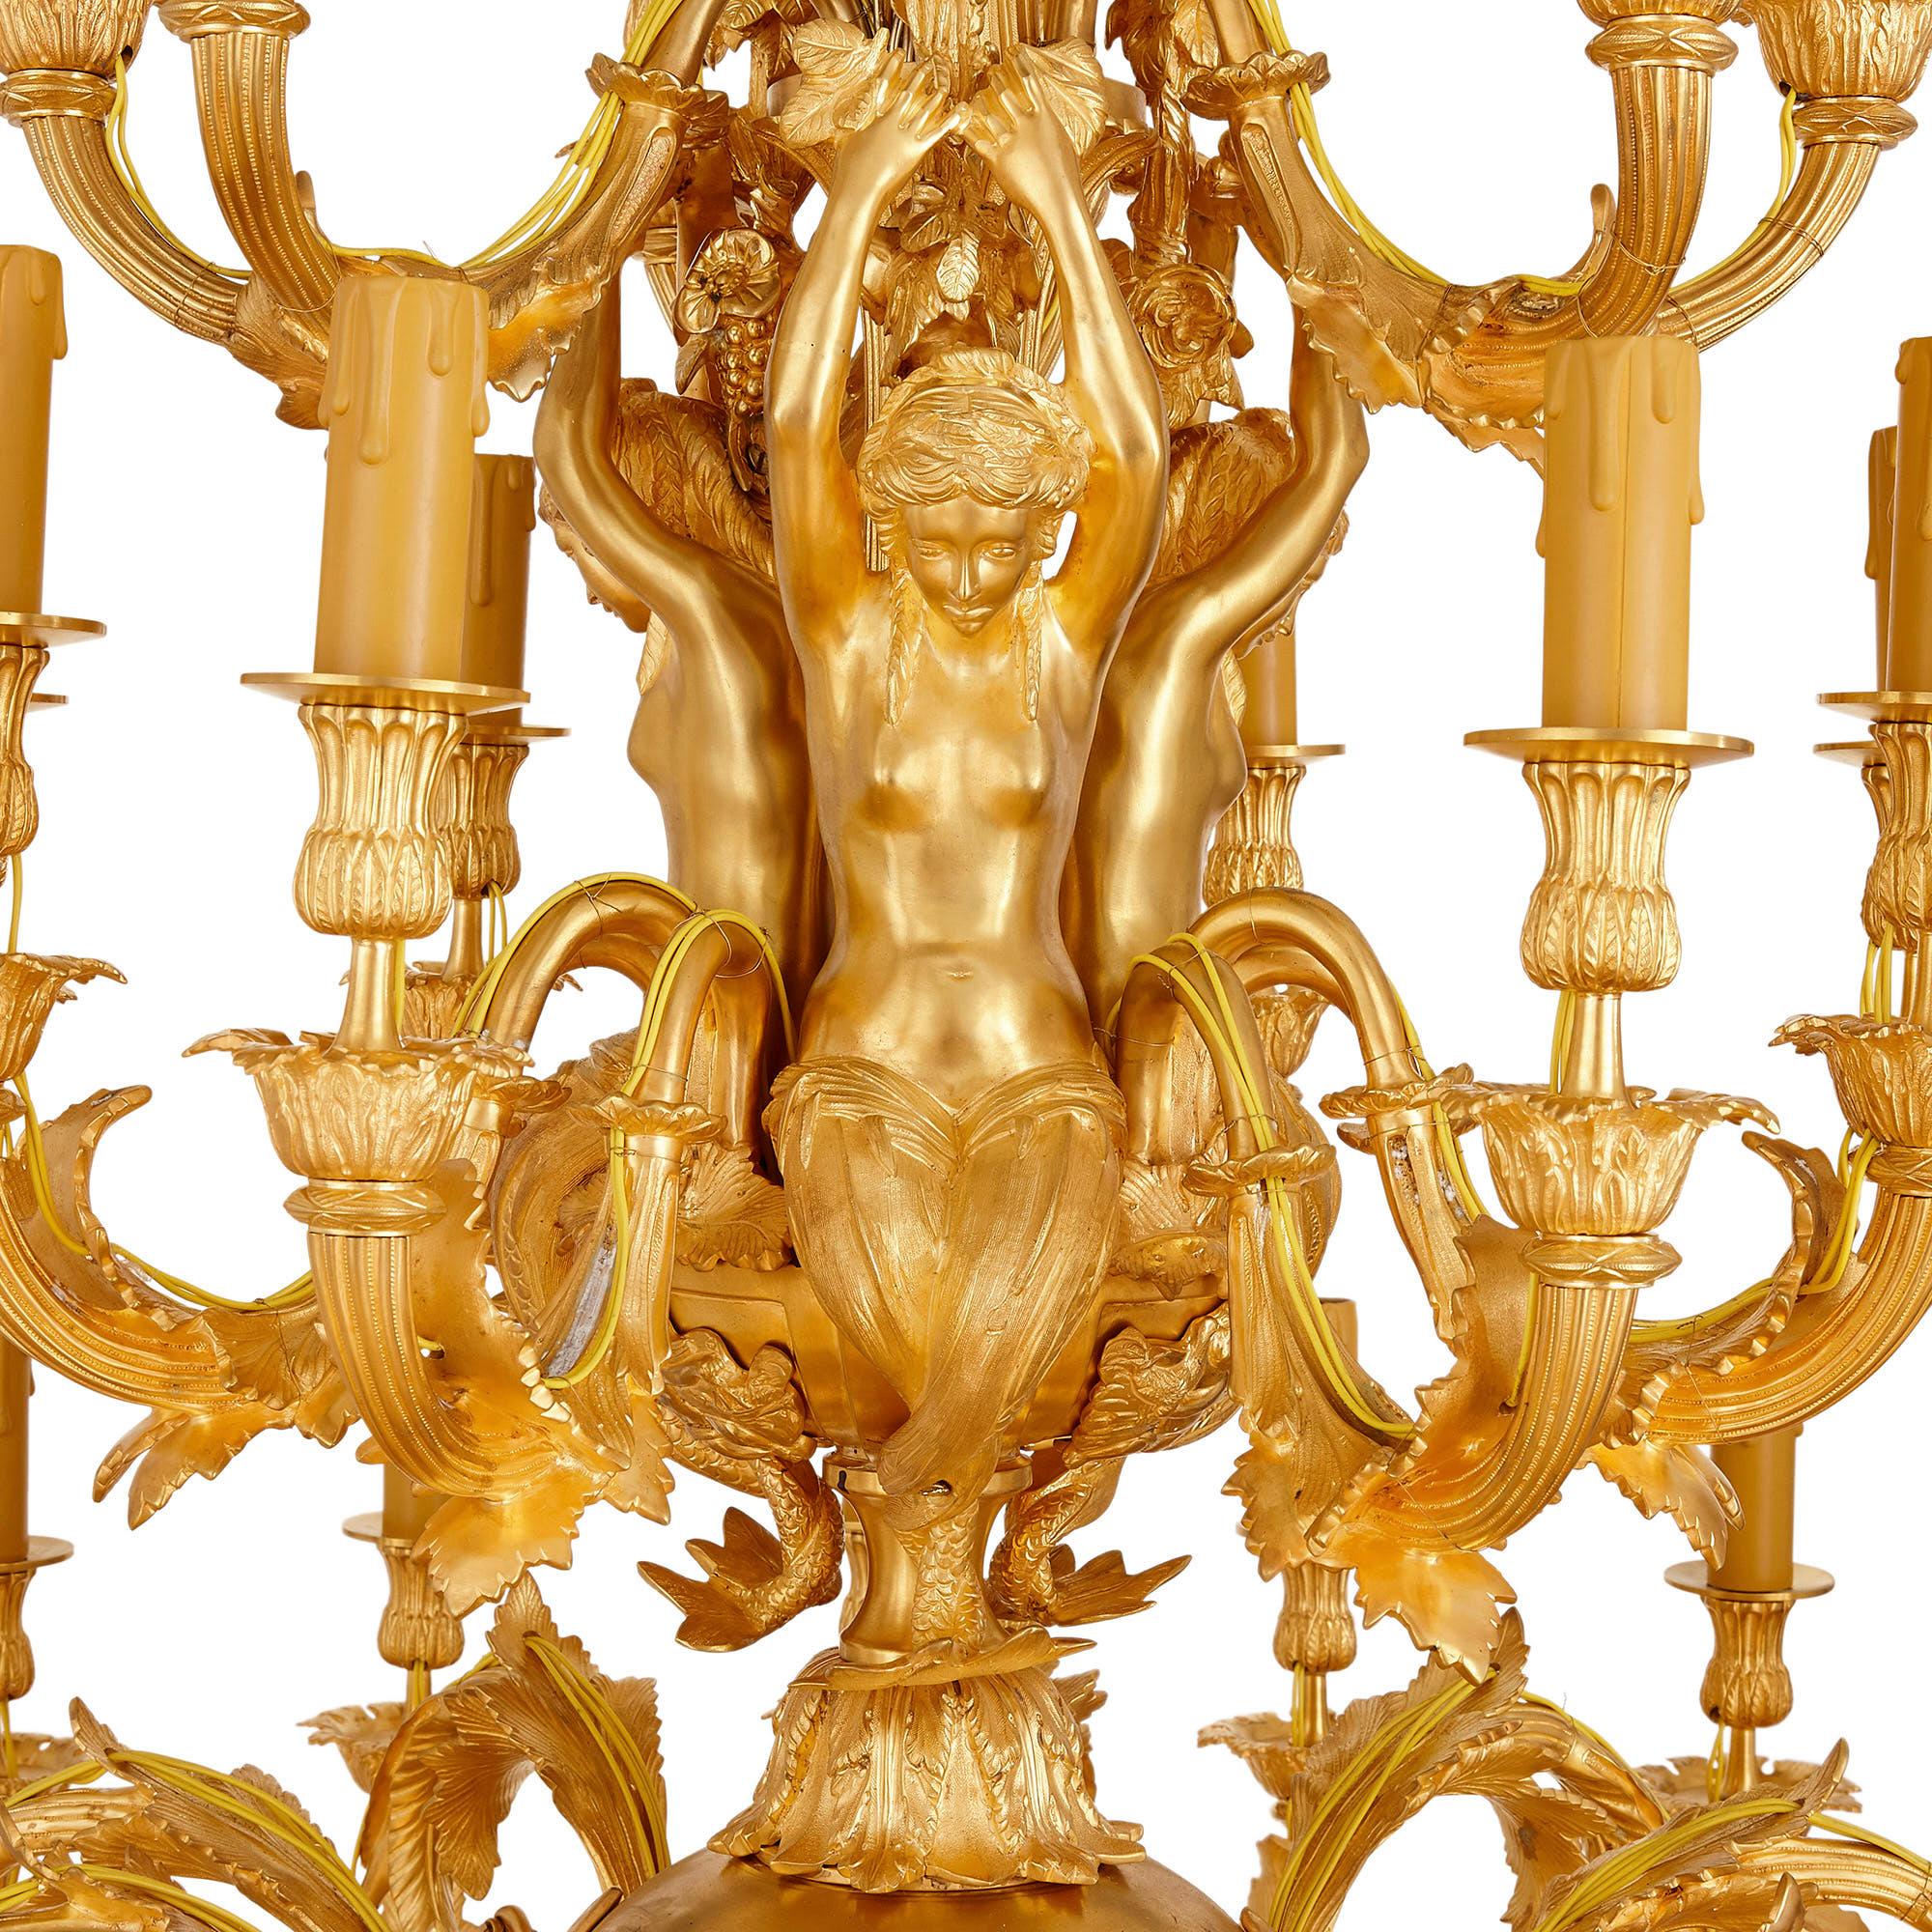 Louis XV style gilt bronze 33-light chandelier
French, 20th Century
Height 156cm, diameter 102cm

This beautiful chandelier is crafted from gilt bronze in the Rococo style of Louis XV. The chandelier features a shaped central column, which